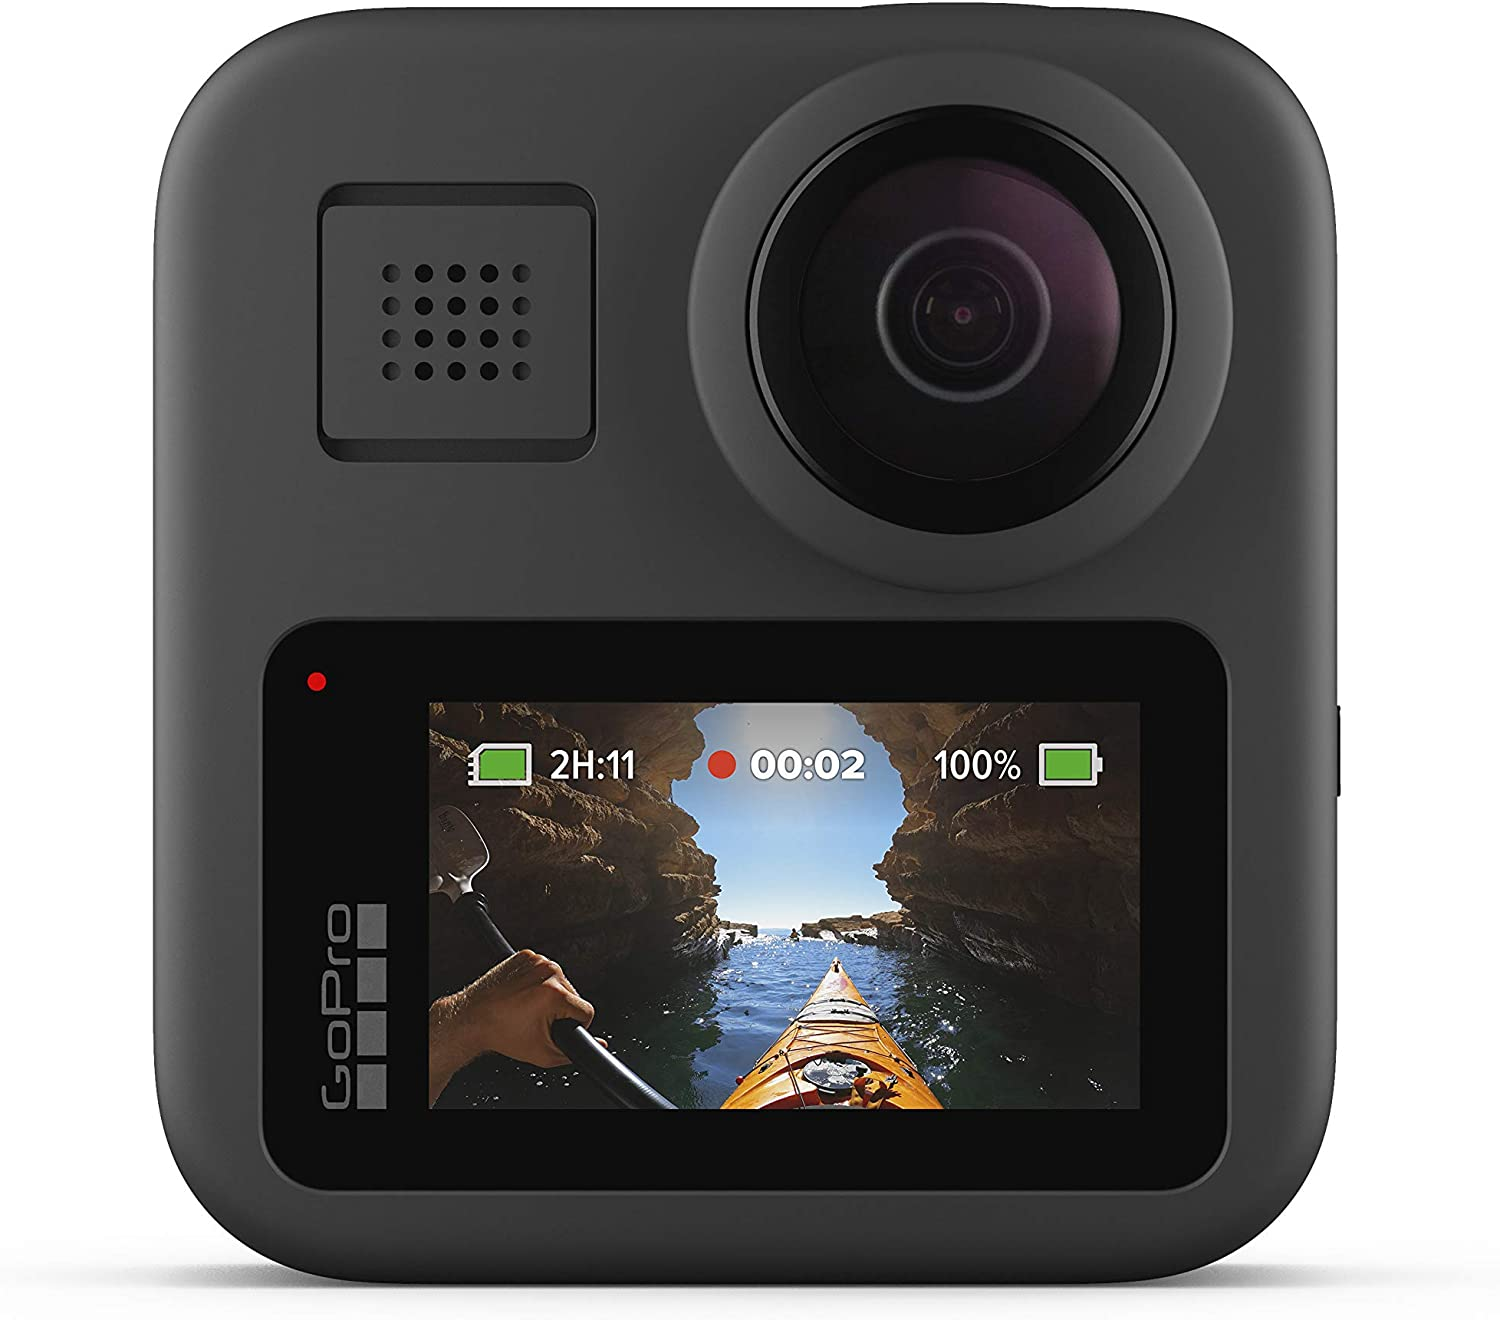 A Go-Pro is an essential accessory if you would like to record your mountain biking adventures.